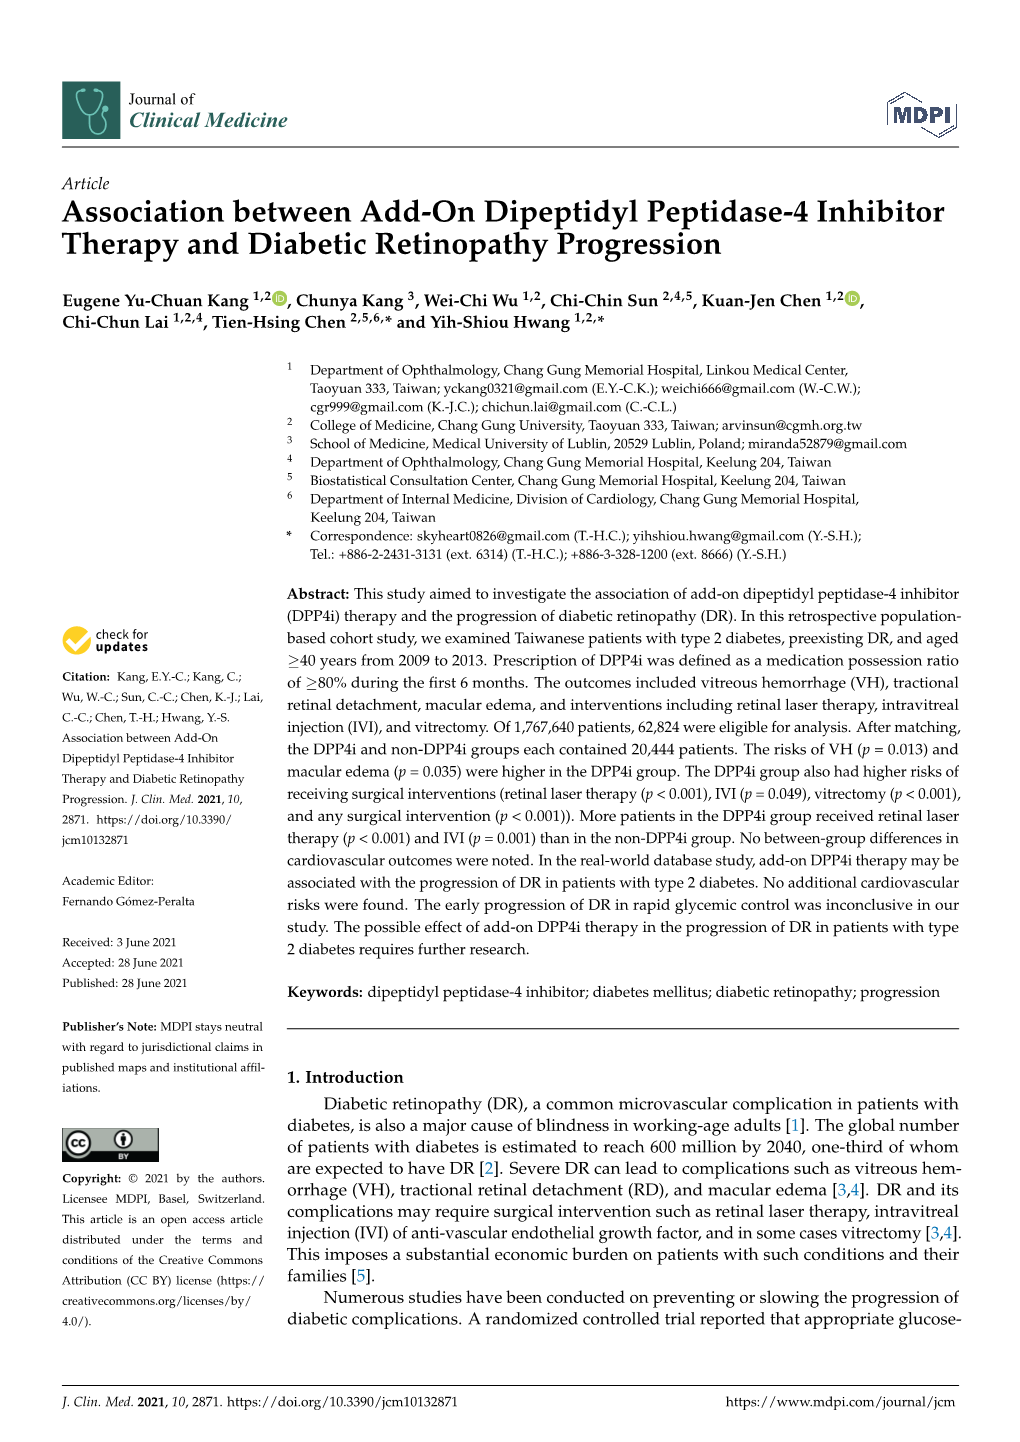 Association Between Add-On Dipeptidyl Peptidase-4 Inhibitor Therapy and Diabetic Retinopathy Progression